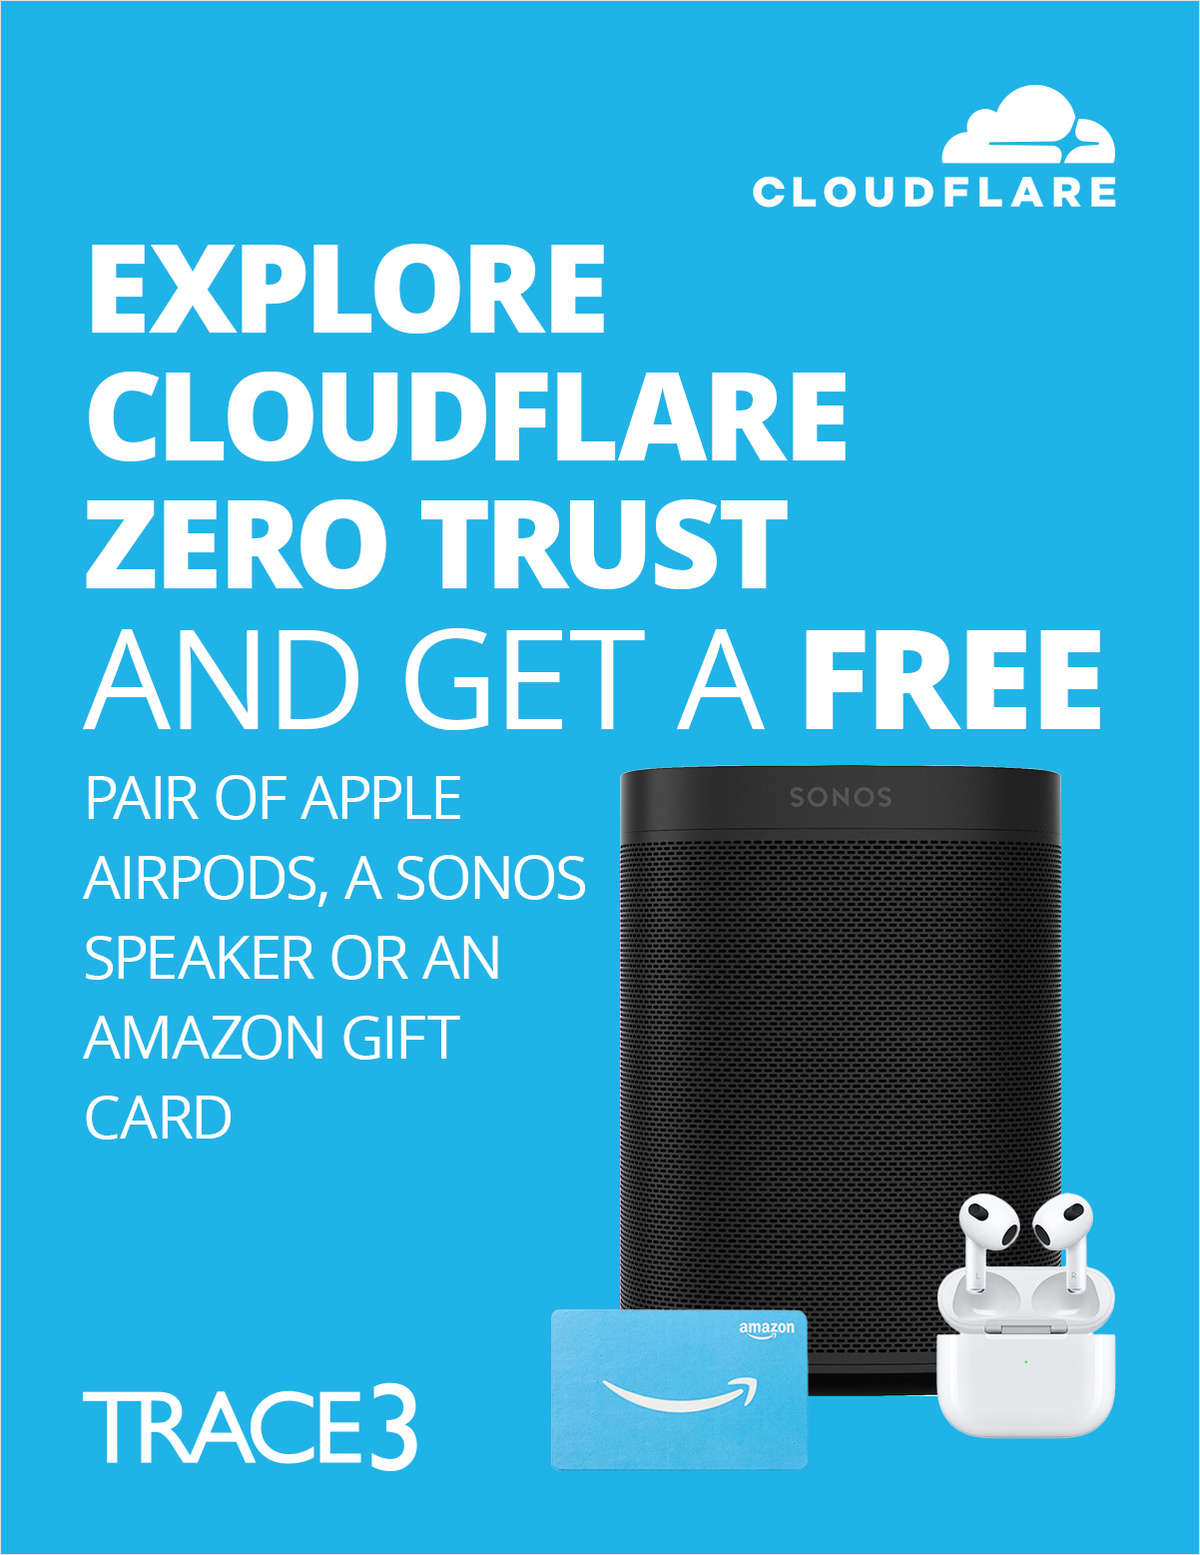 Explore Cloudflare Zero Trust Network Access and Get a Free Pair of Apple AirPods, a Sonos Speaker or an Amazon Gift Card